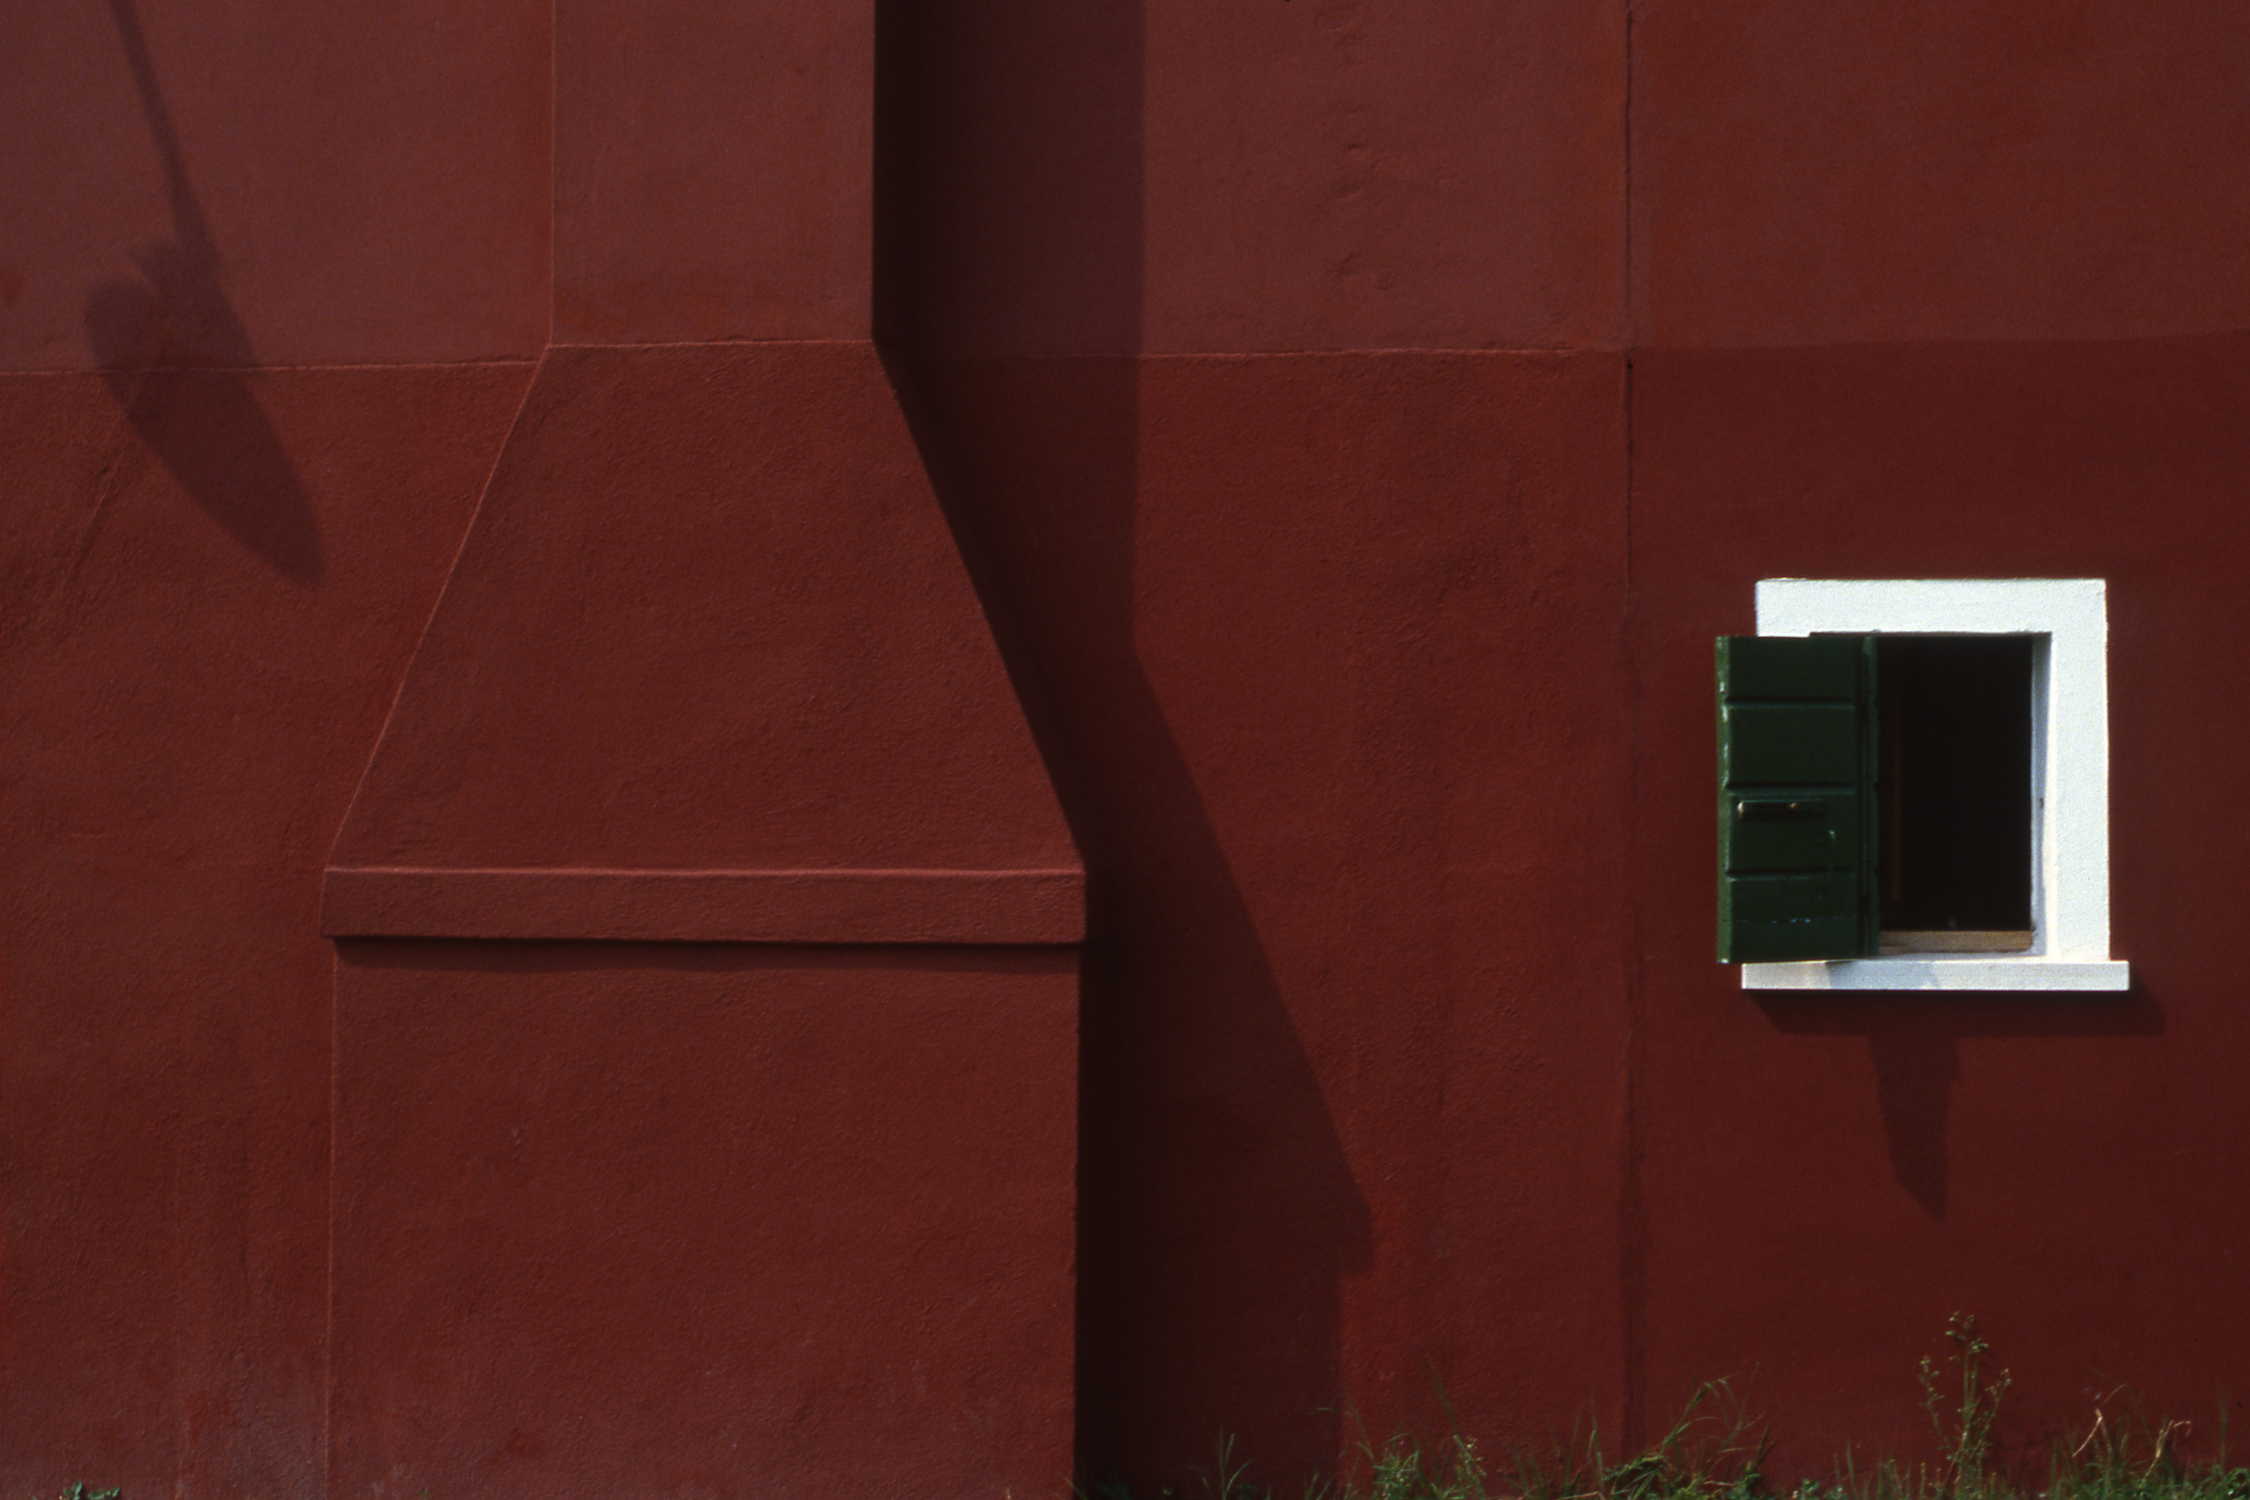   Red Wall with Window, Burano Italy, 1978 ,&nbsp;Cibachrome Print, 16 x 24cm, Edition of 10.&nbsp;&nbsp; &nbsp; &nbsp; &nbsp; &nbsp; &nbsp; &nbsp; &nbsp; &nbsp; &nbsp; &nbsp; &nbsp; &nbsp;  Exhibition:  Burano Colour Works ,&nbsp;Australian Centre f